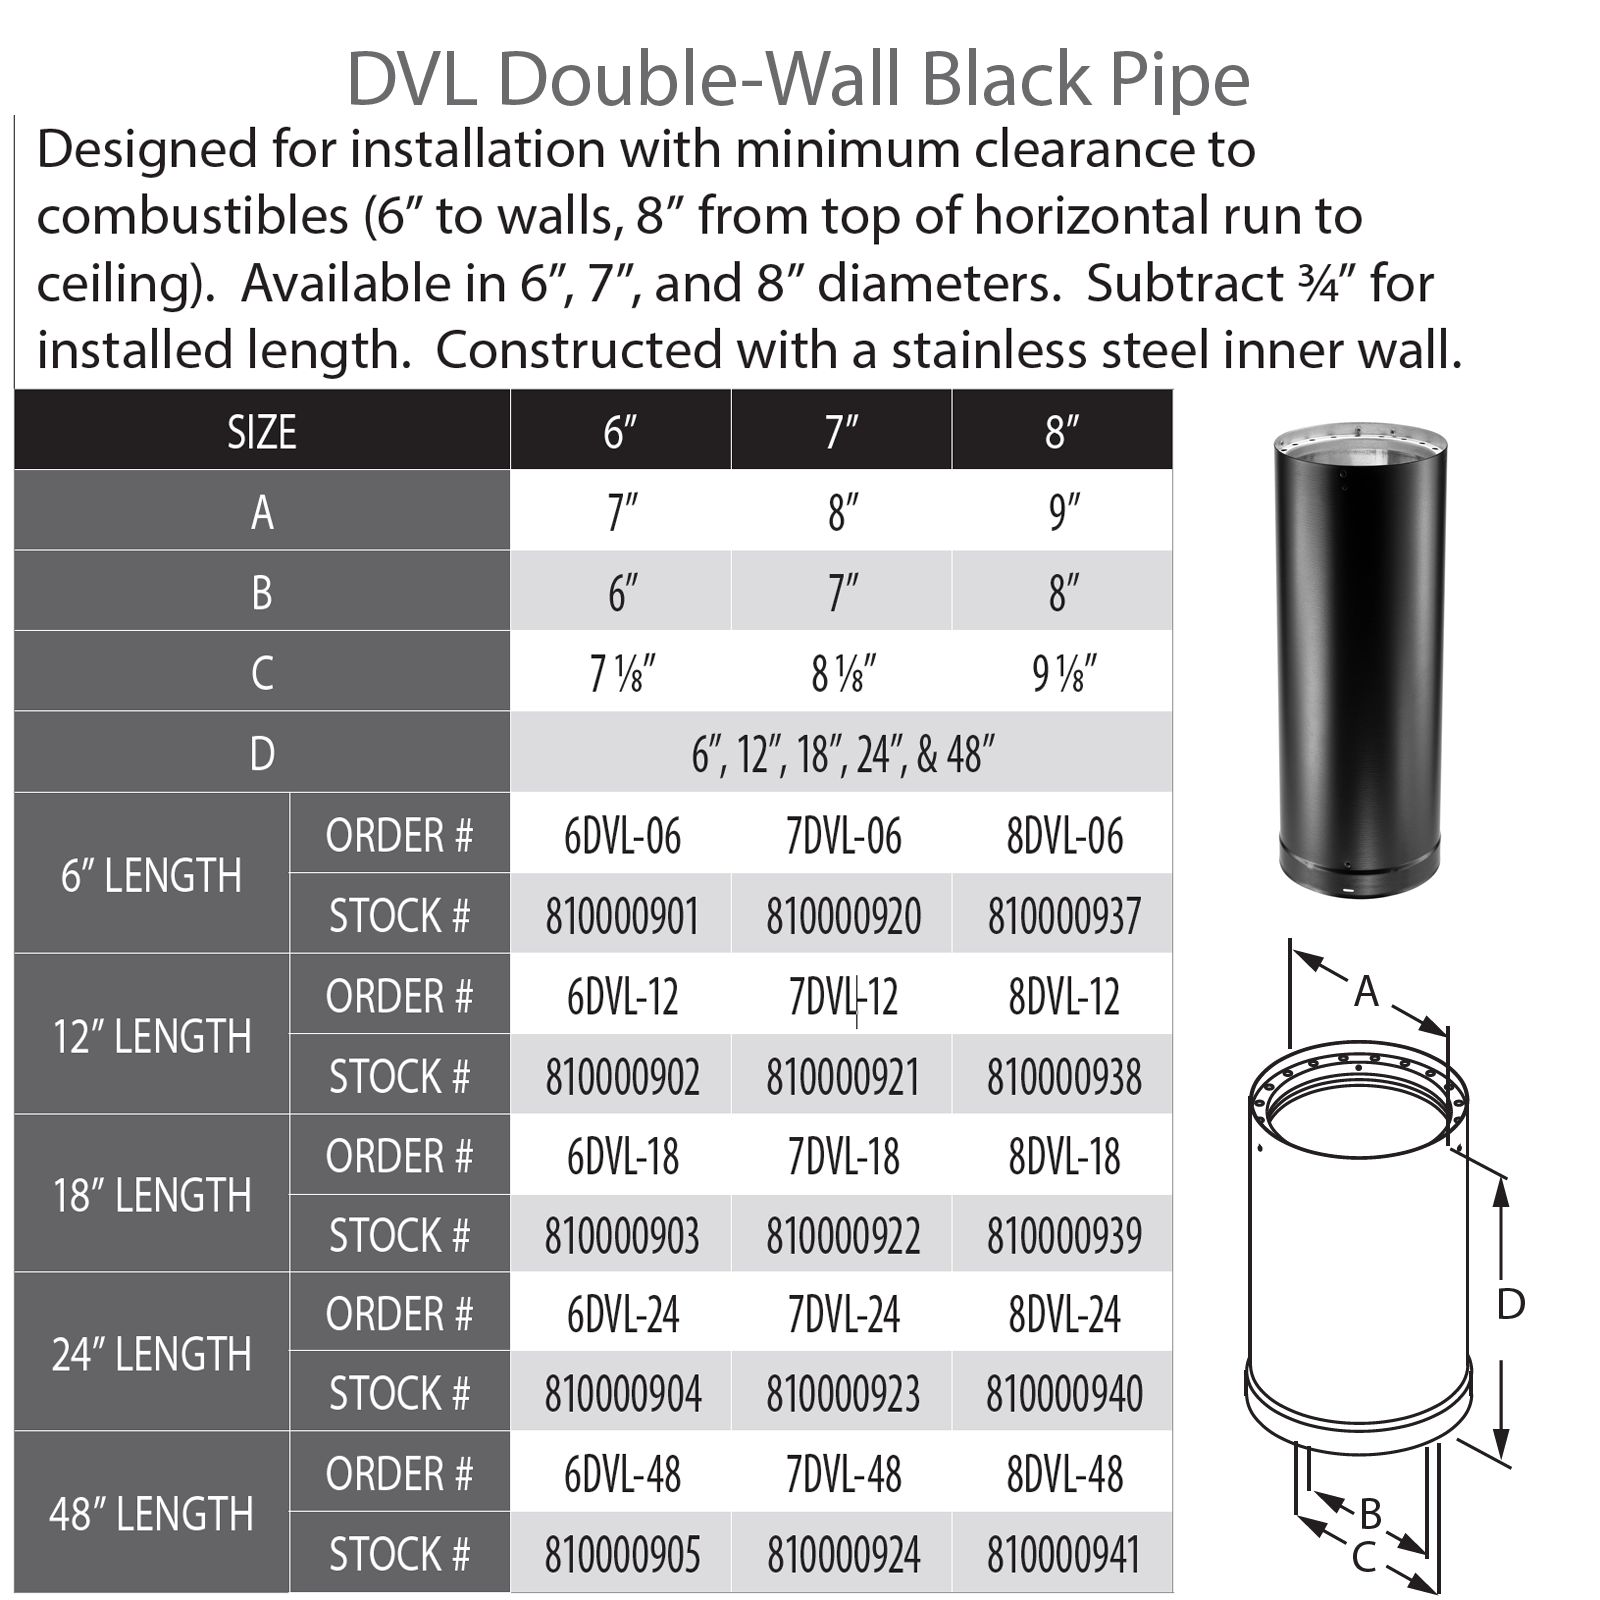 8 Diameter DuraVent DVL Double-Wall Stove Pipe Components